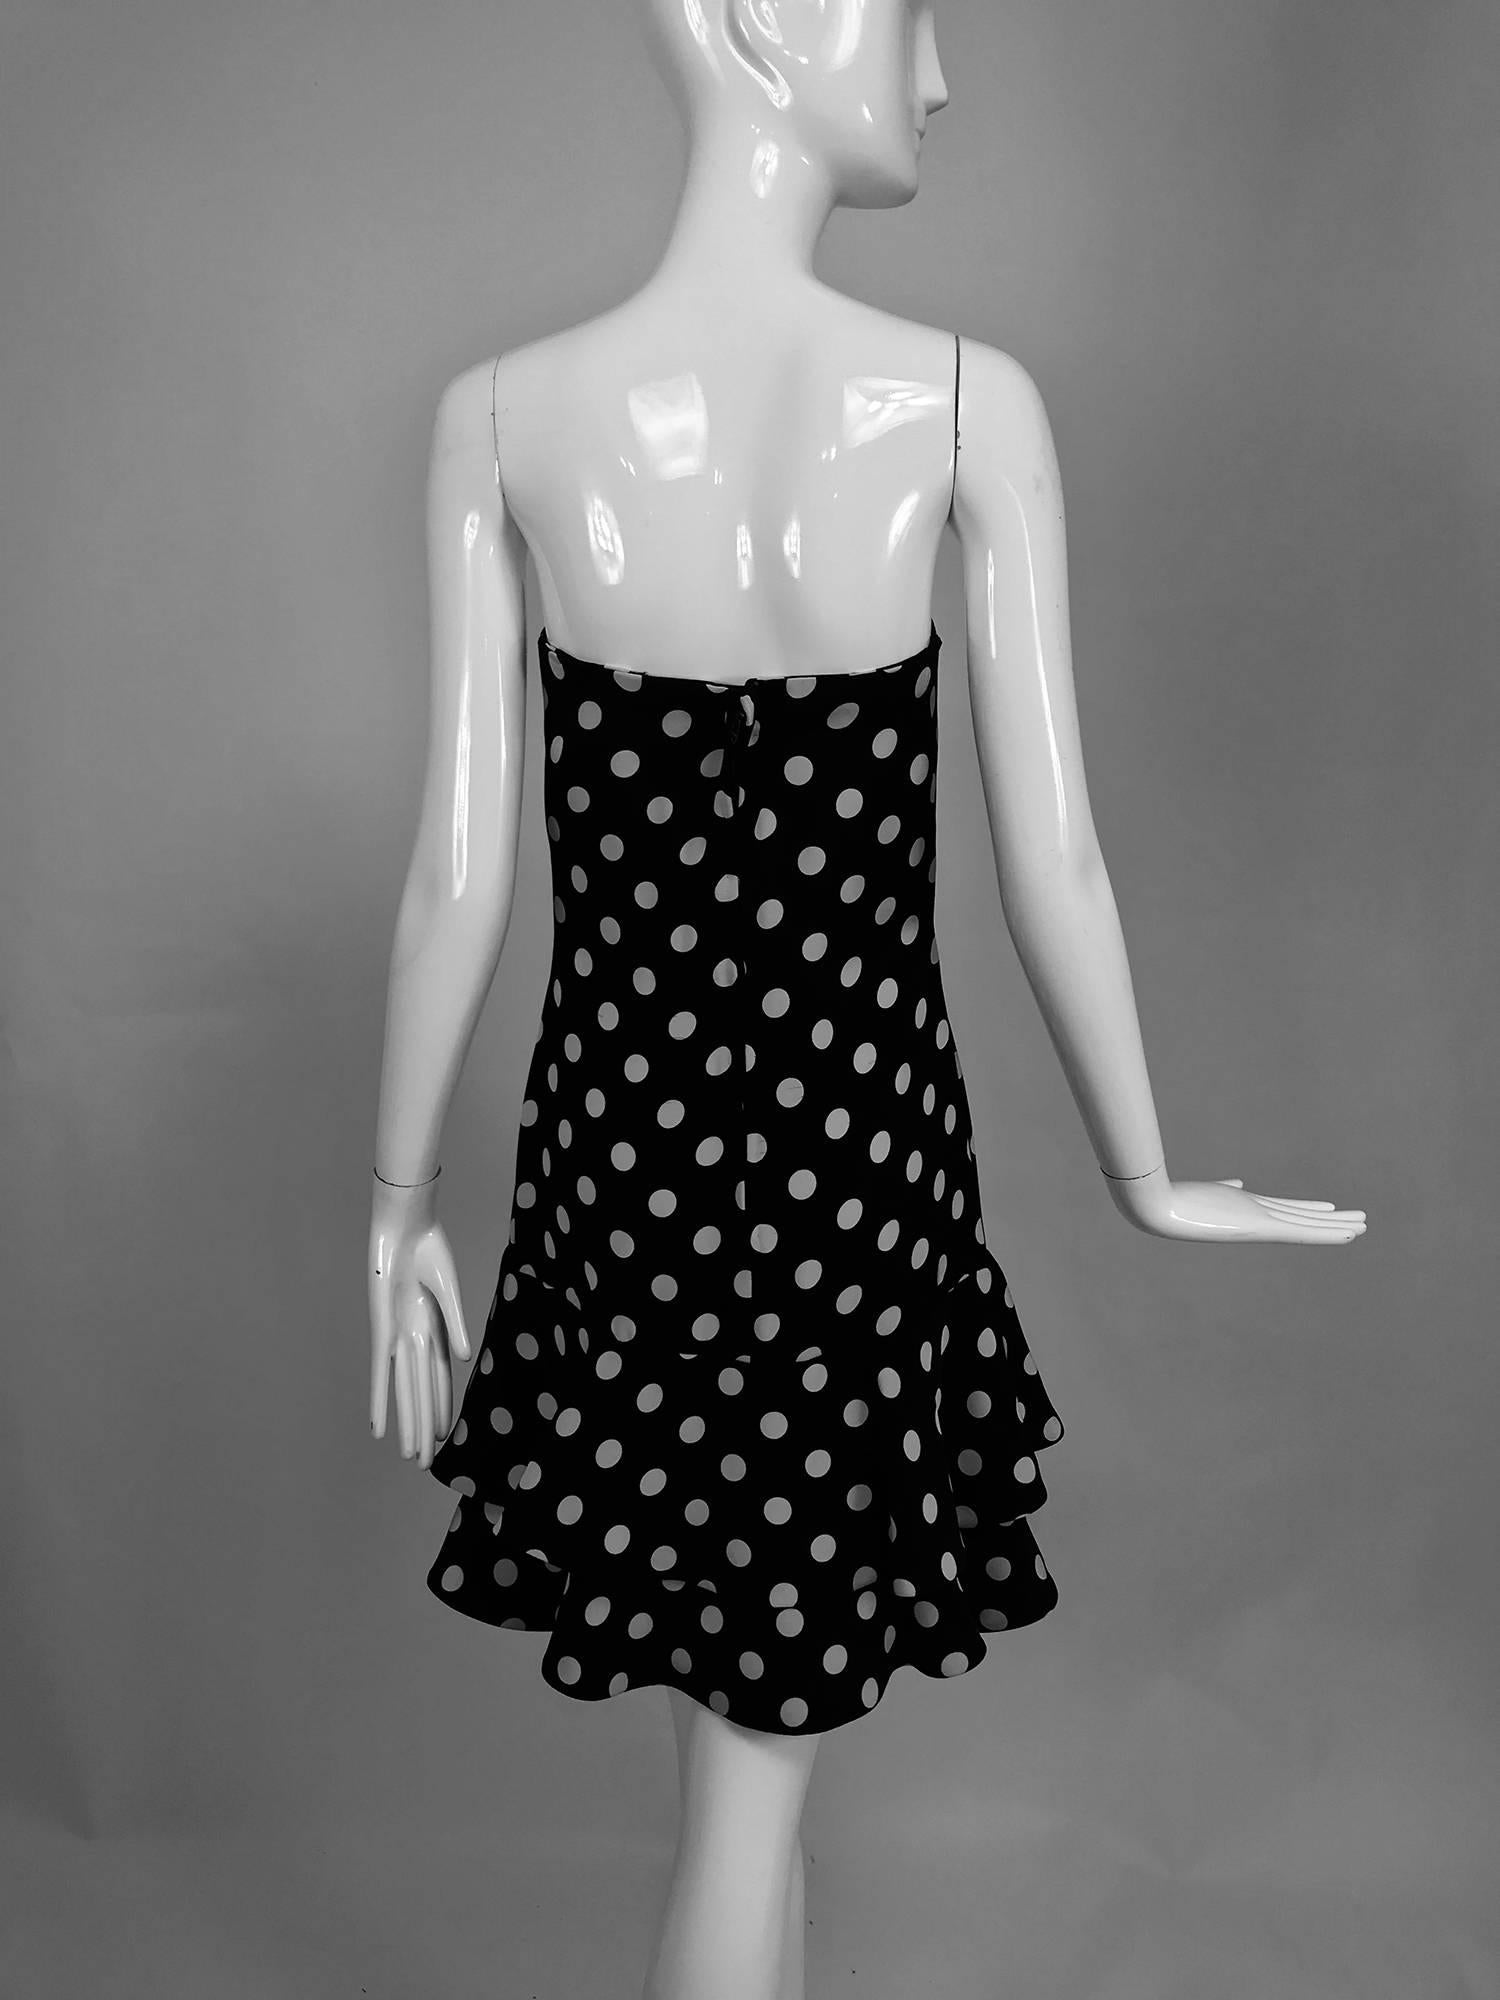 Carolyne Roehm black and white polka dot strapless dress and jacket 1990s In Excellent Condition For Sale In West Palm Beach, FL